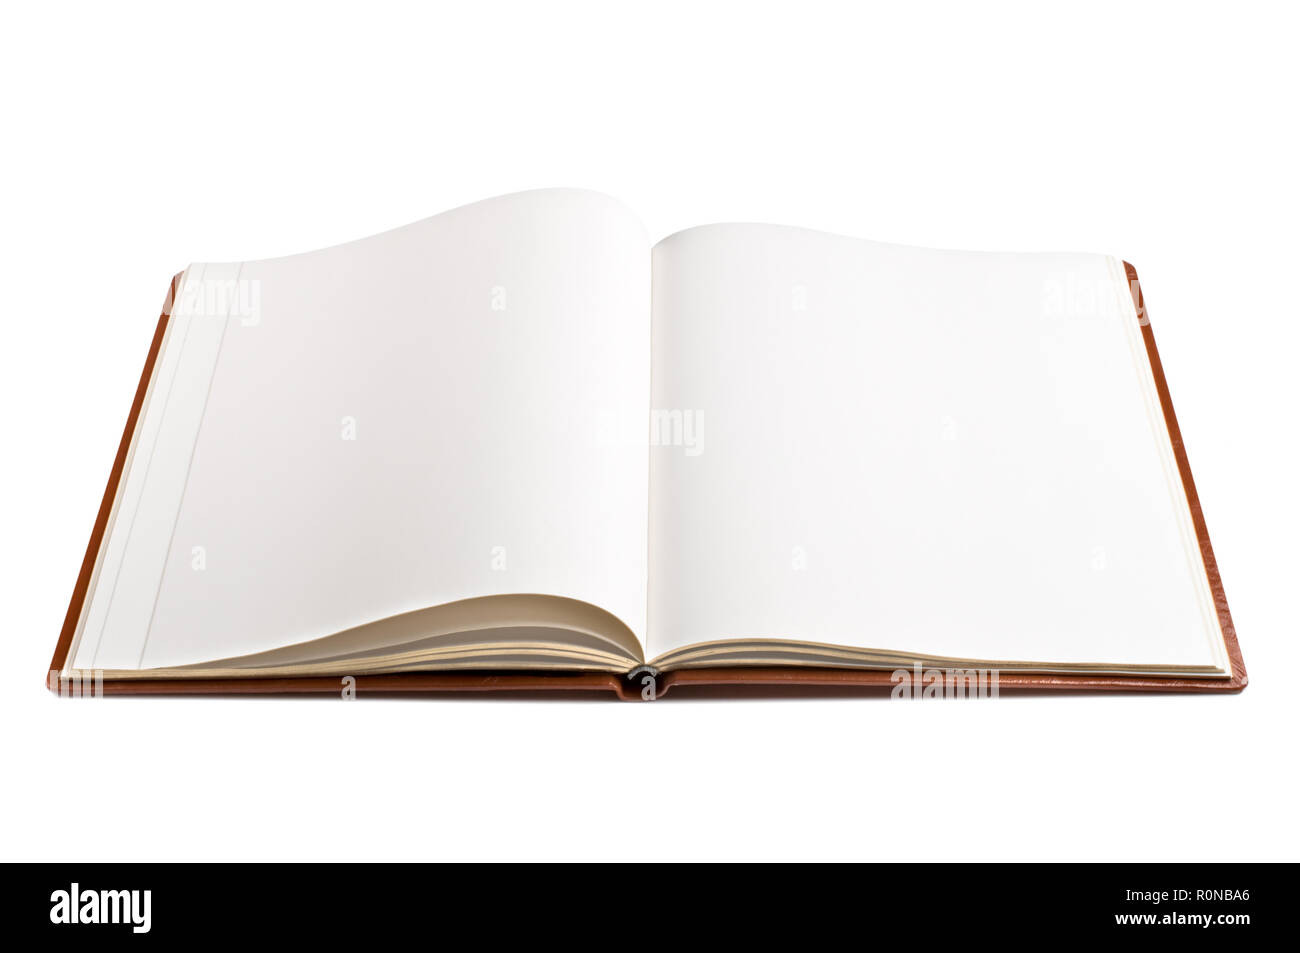 An open book with blank white pages. Isolated on white background. Stock Photo